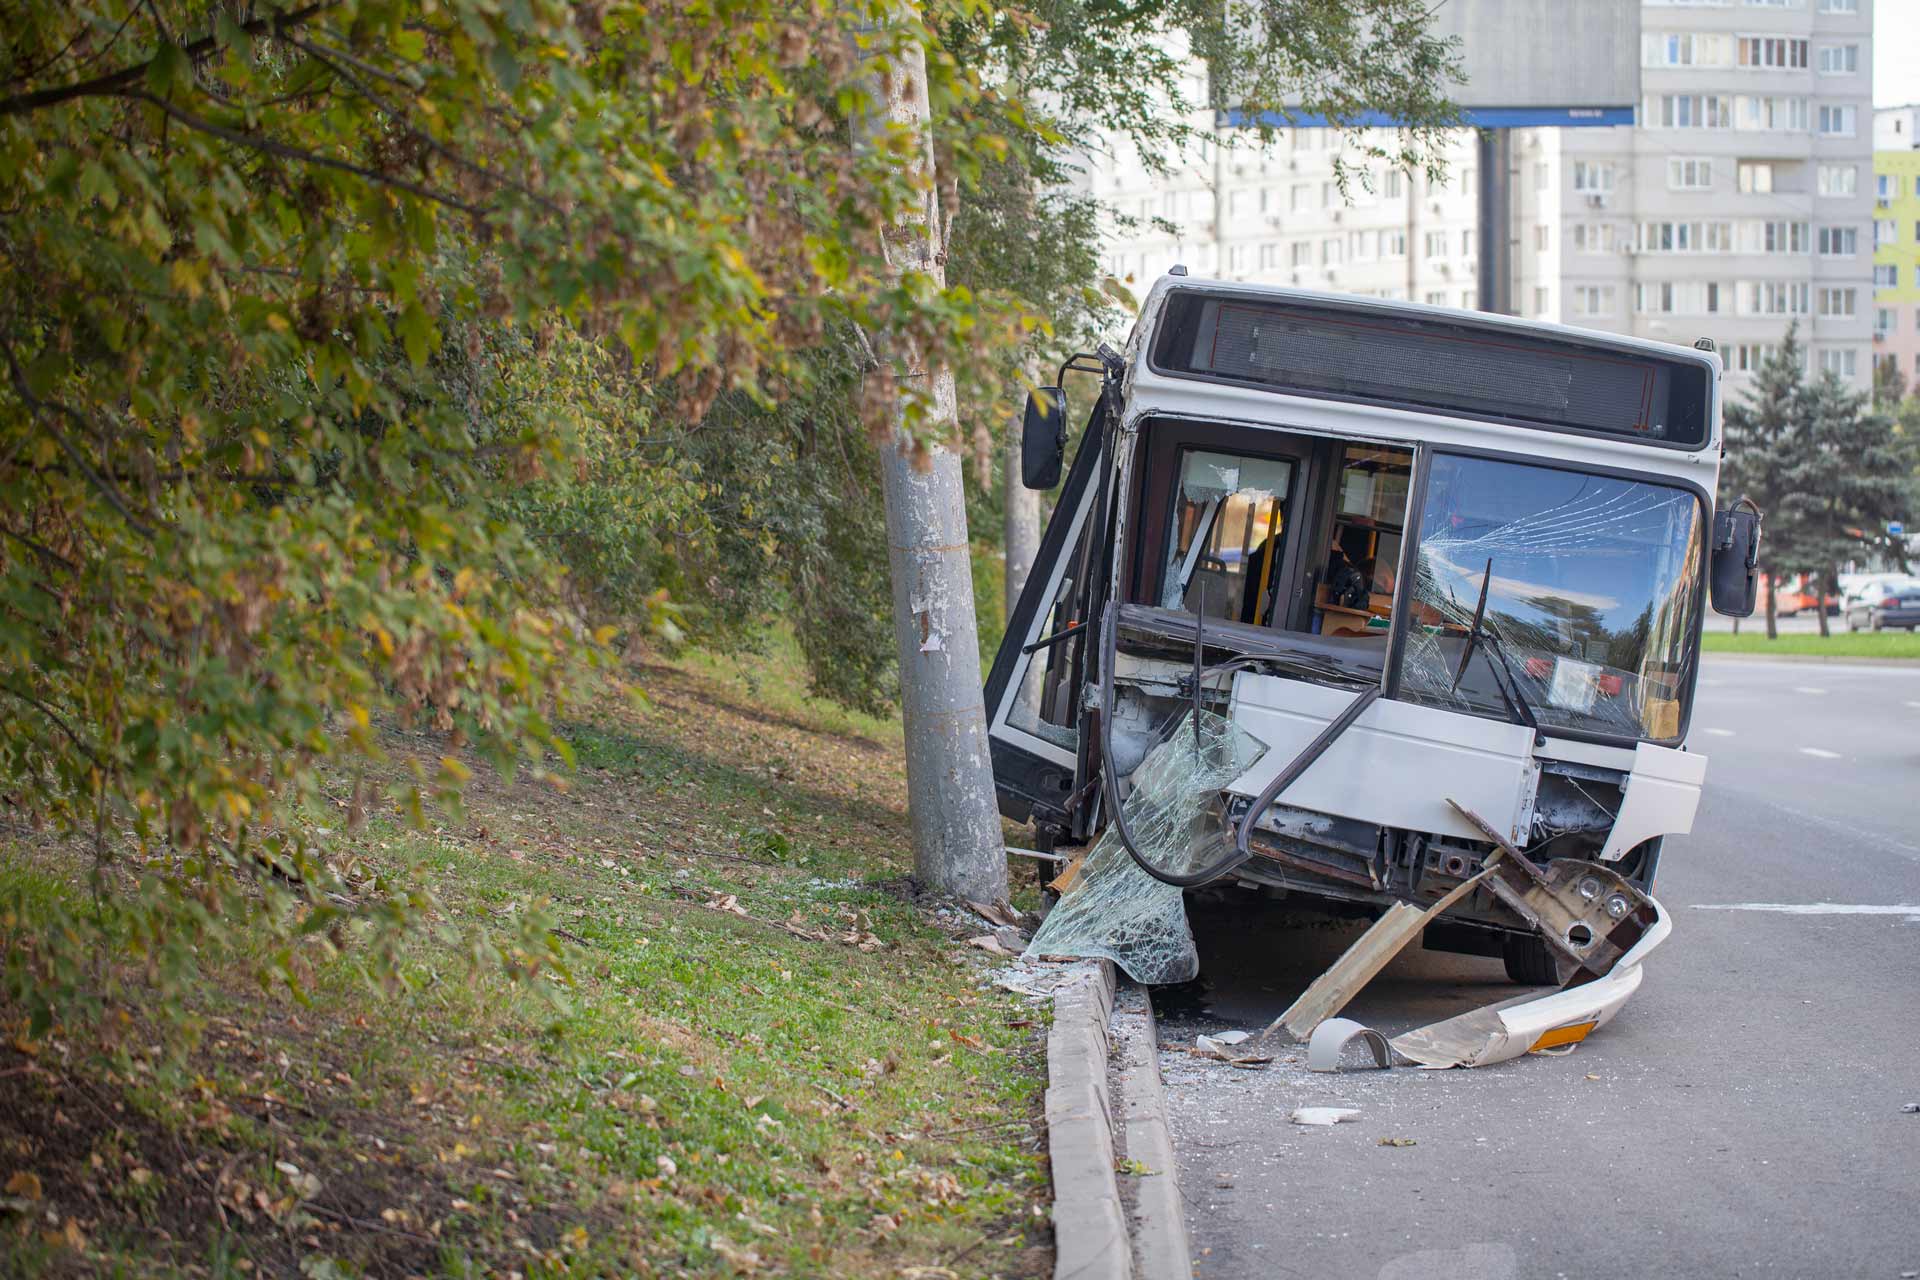 Road accident, accident with a passenger city bus, the bus crashed into a pole